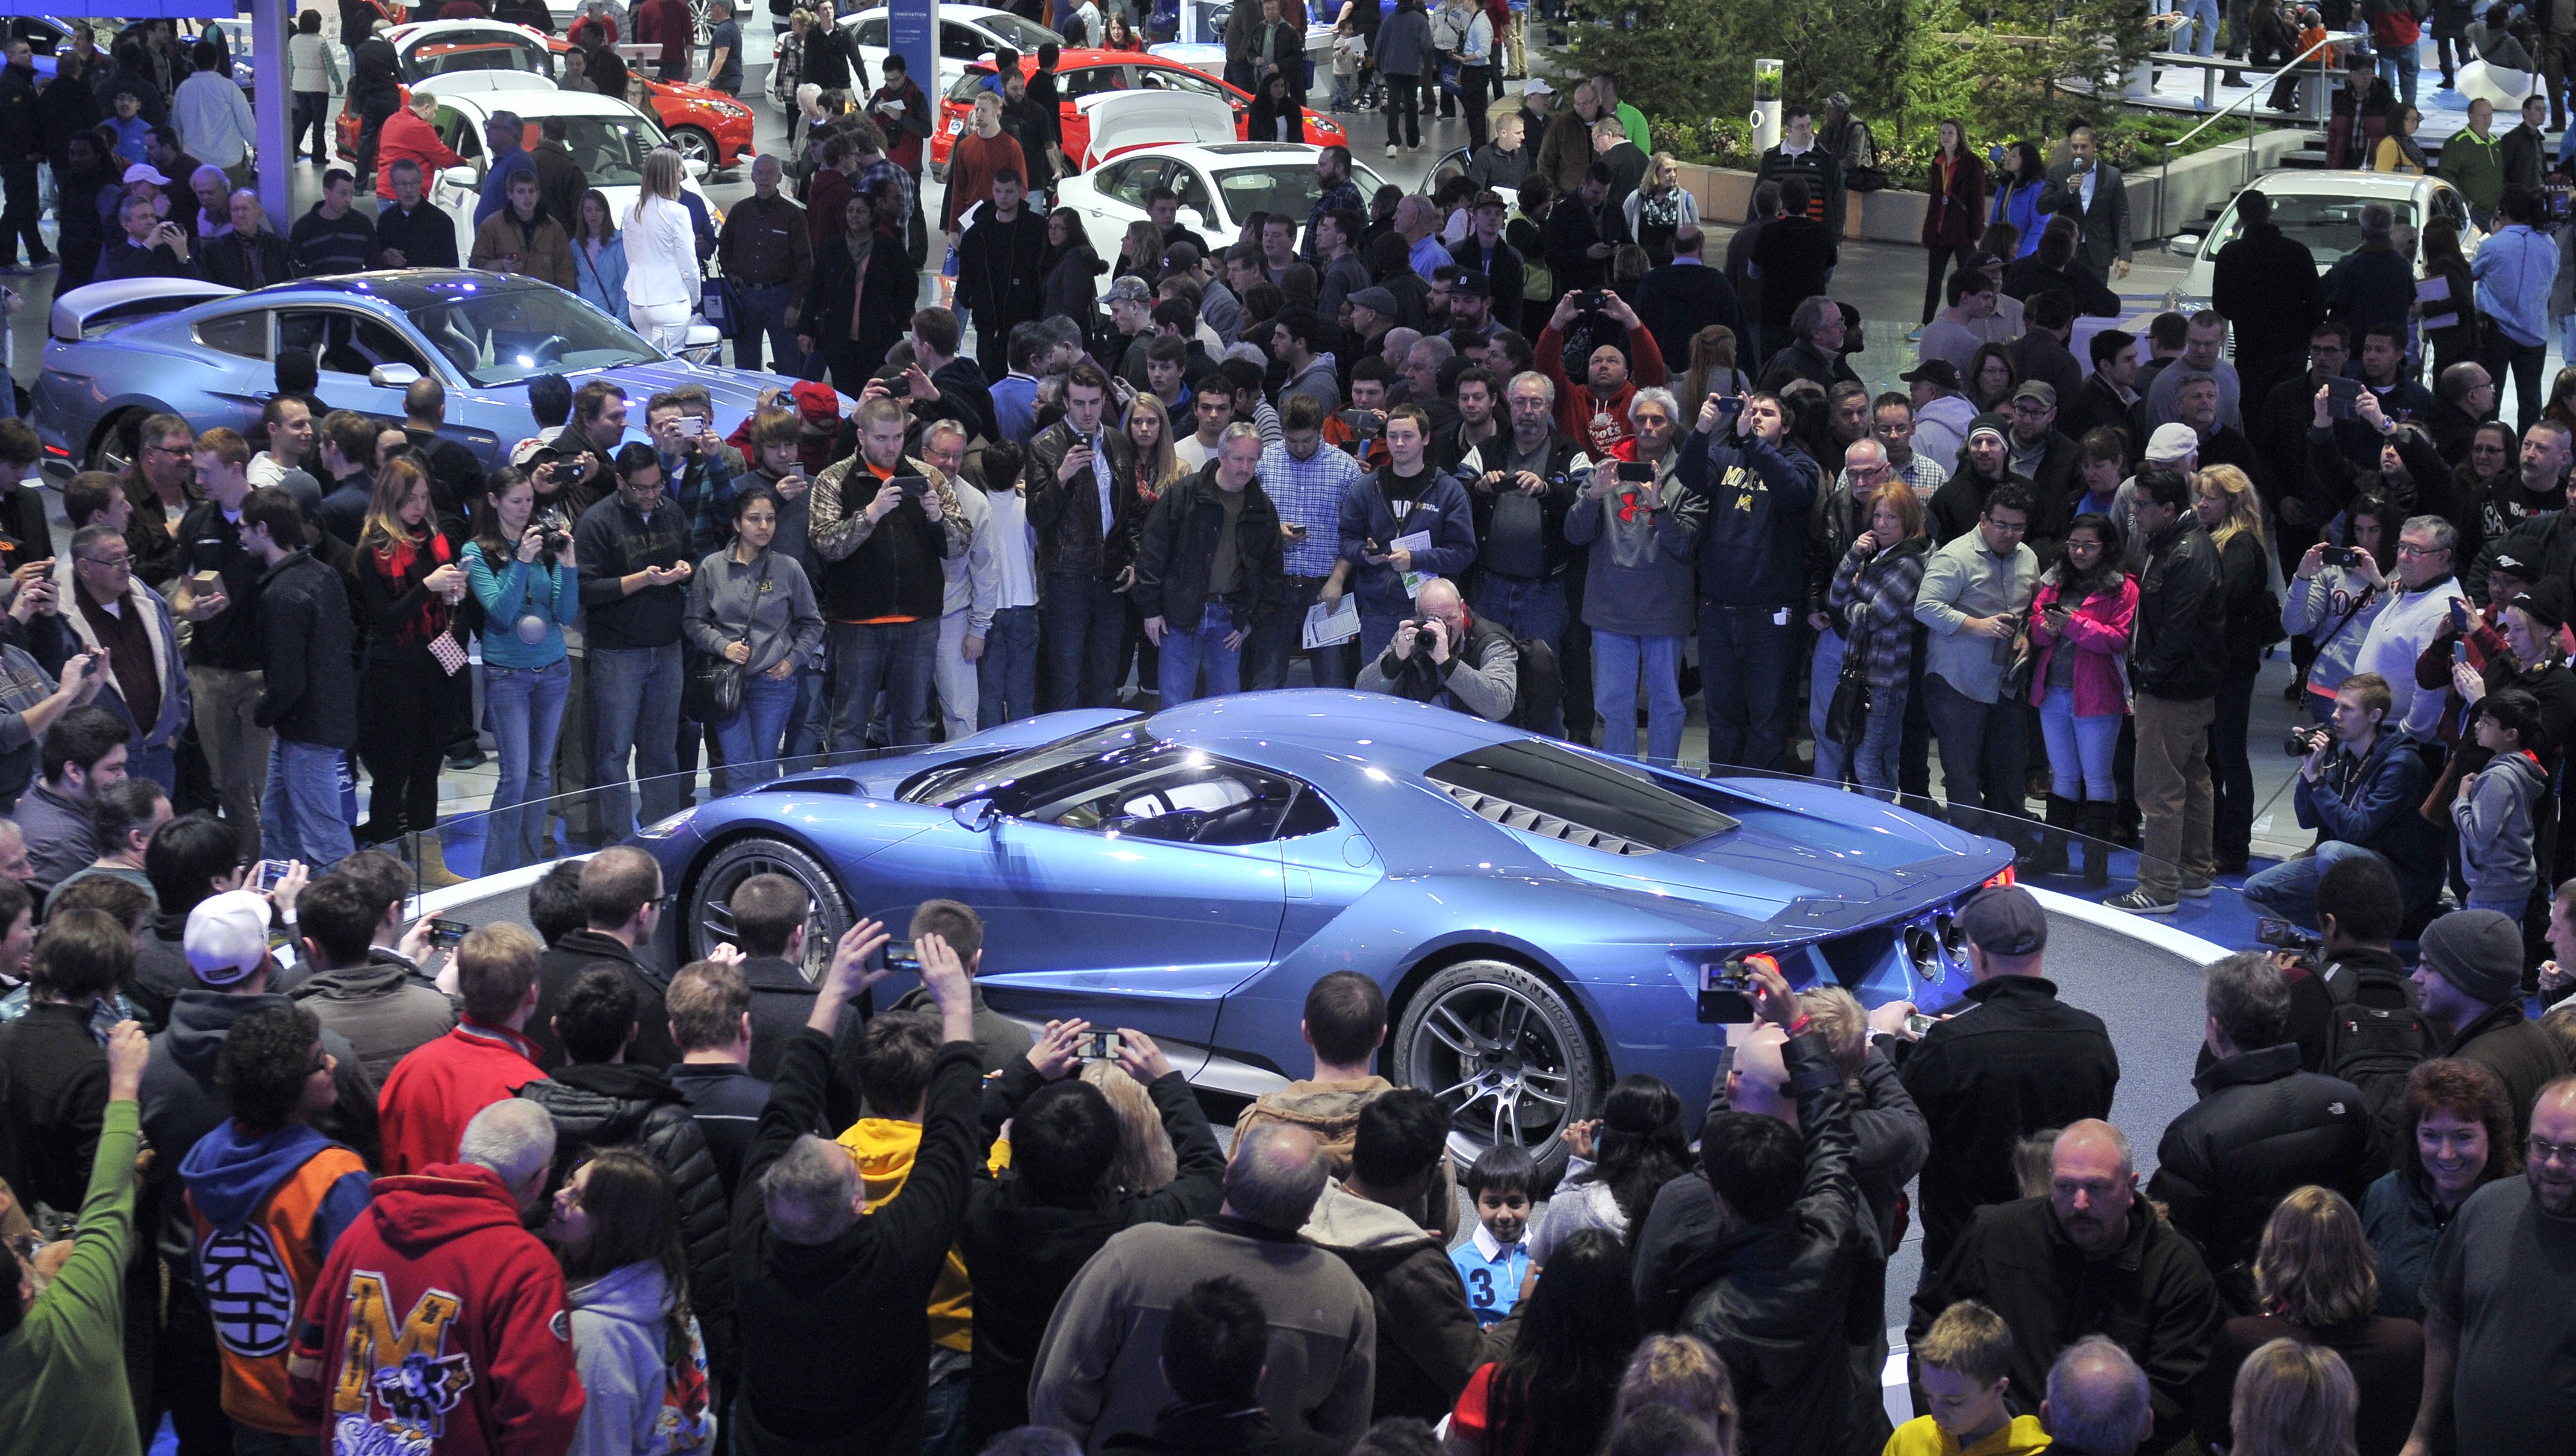 The street version of the Ford GT, which goes on sale in very limited quantities later this year, got plenty of attention last year at the 2015  North American International Auto Show.